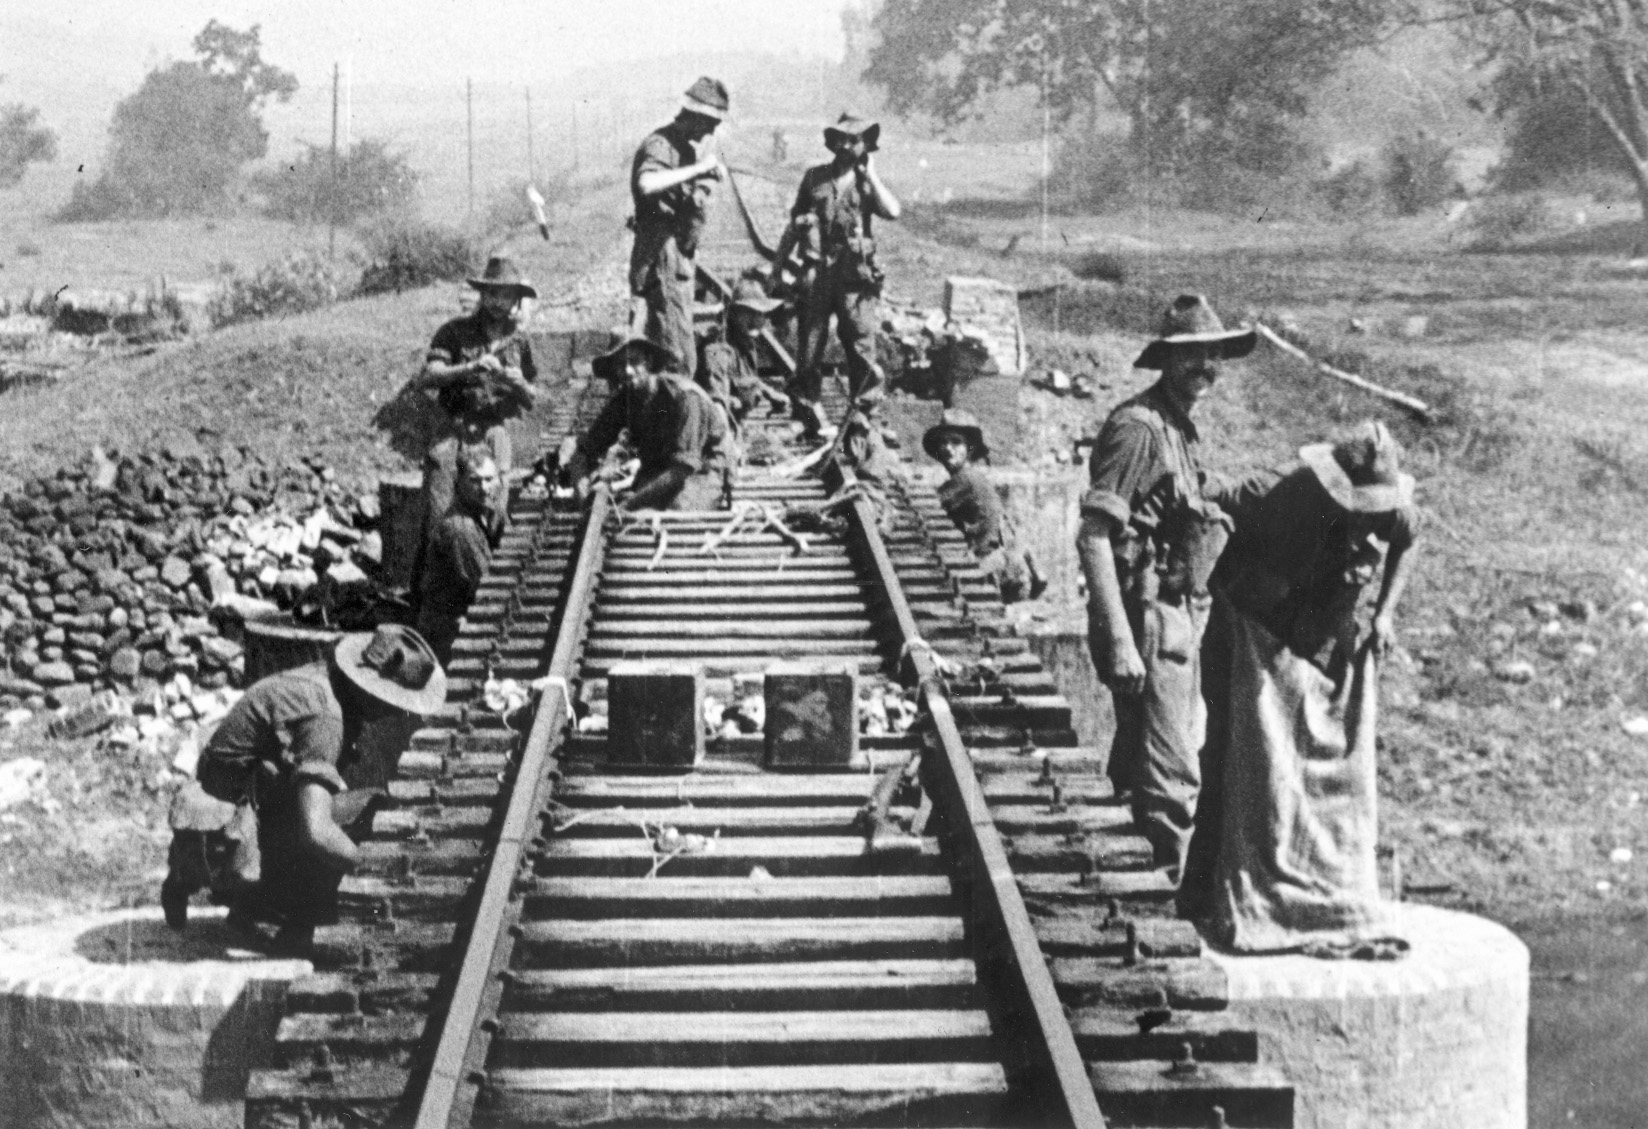 Wiring explosive charges, Chindits prepare a railroad bridge for demolition.